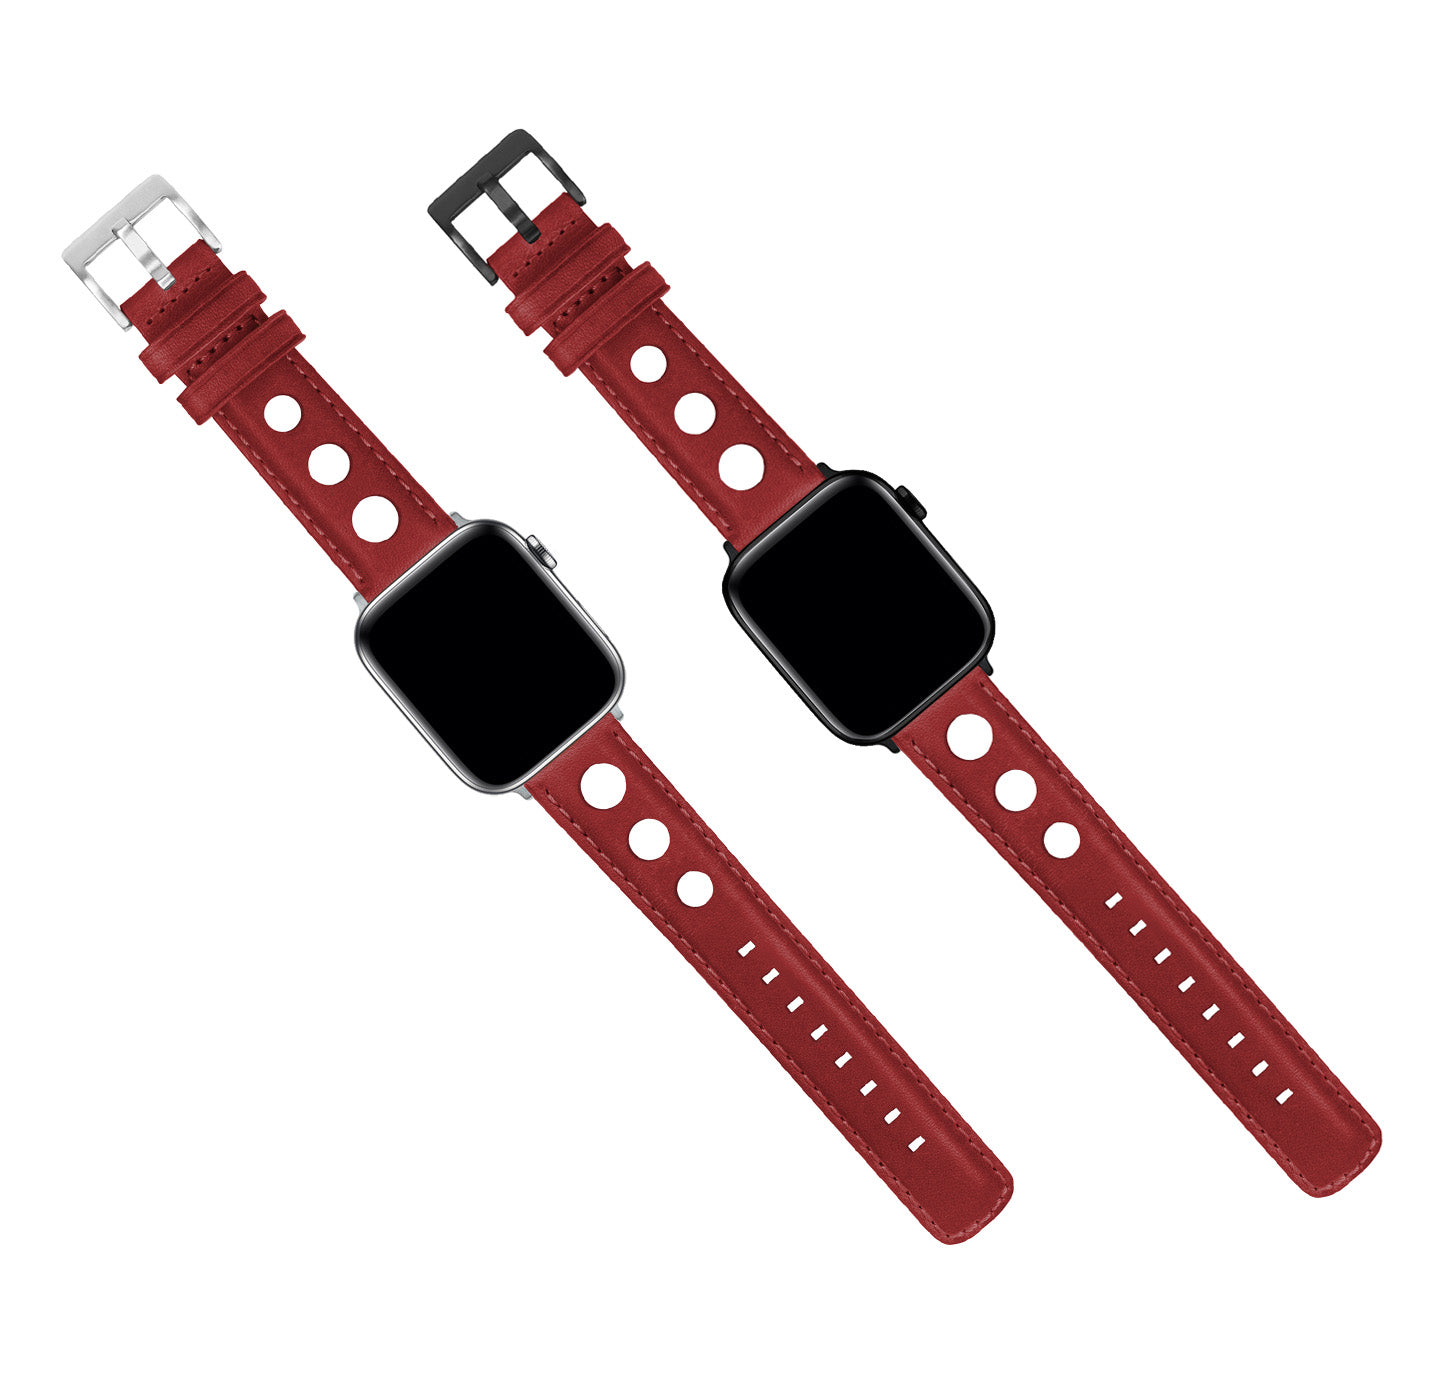 Apple Watch | Crimson Red Rally Horween Leather - Barton Watch Bands